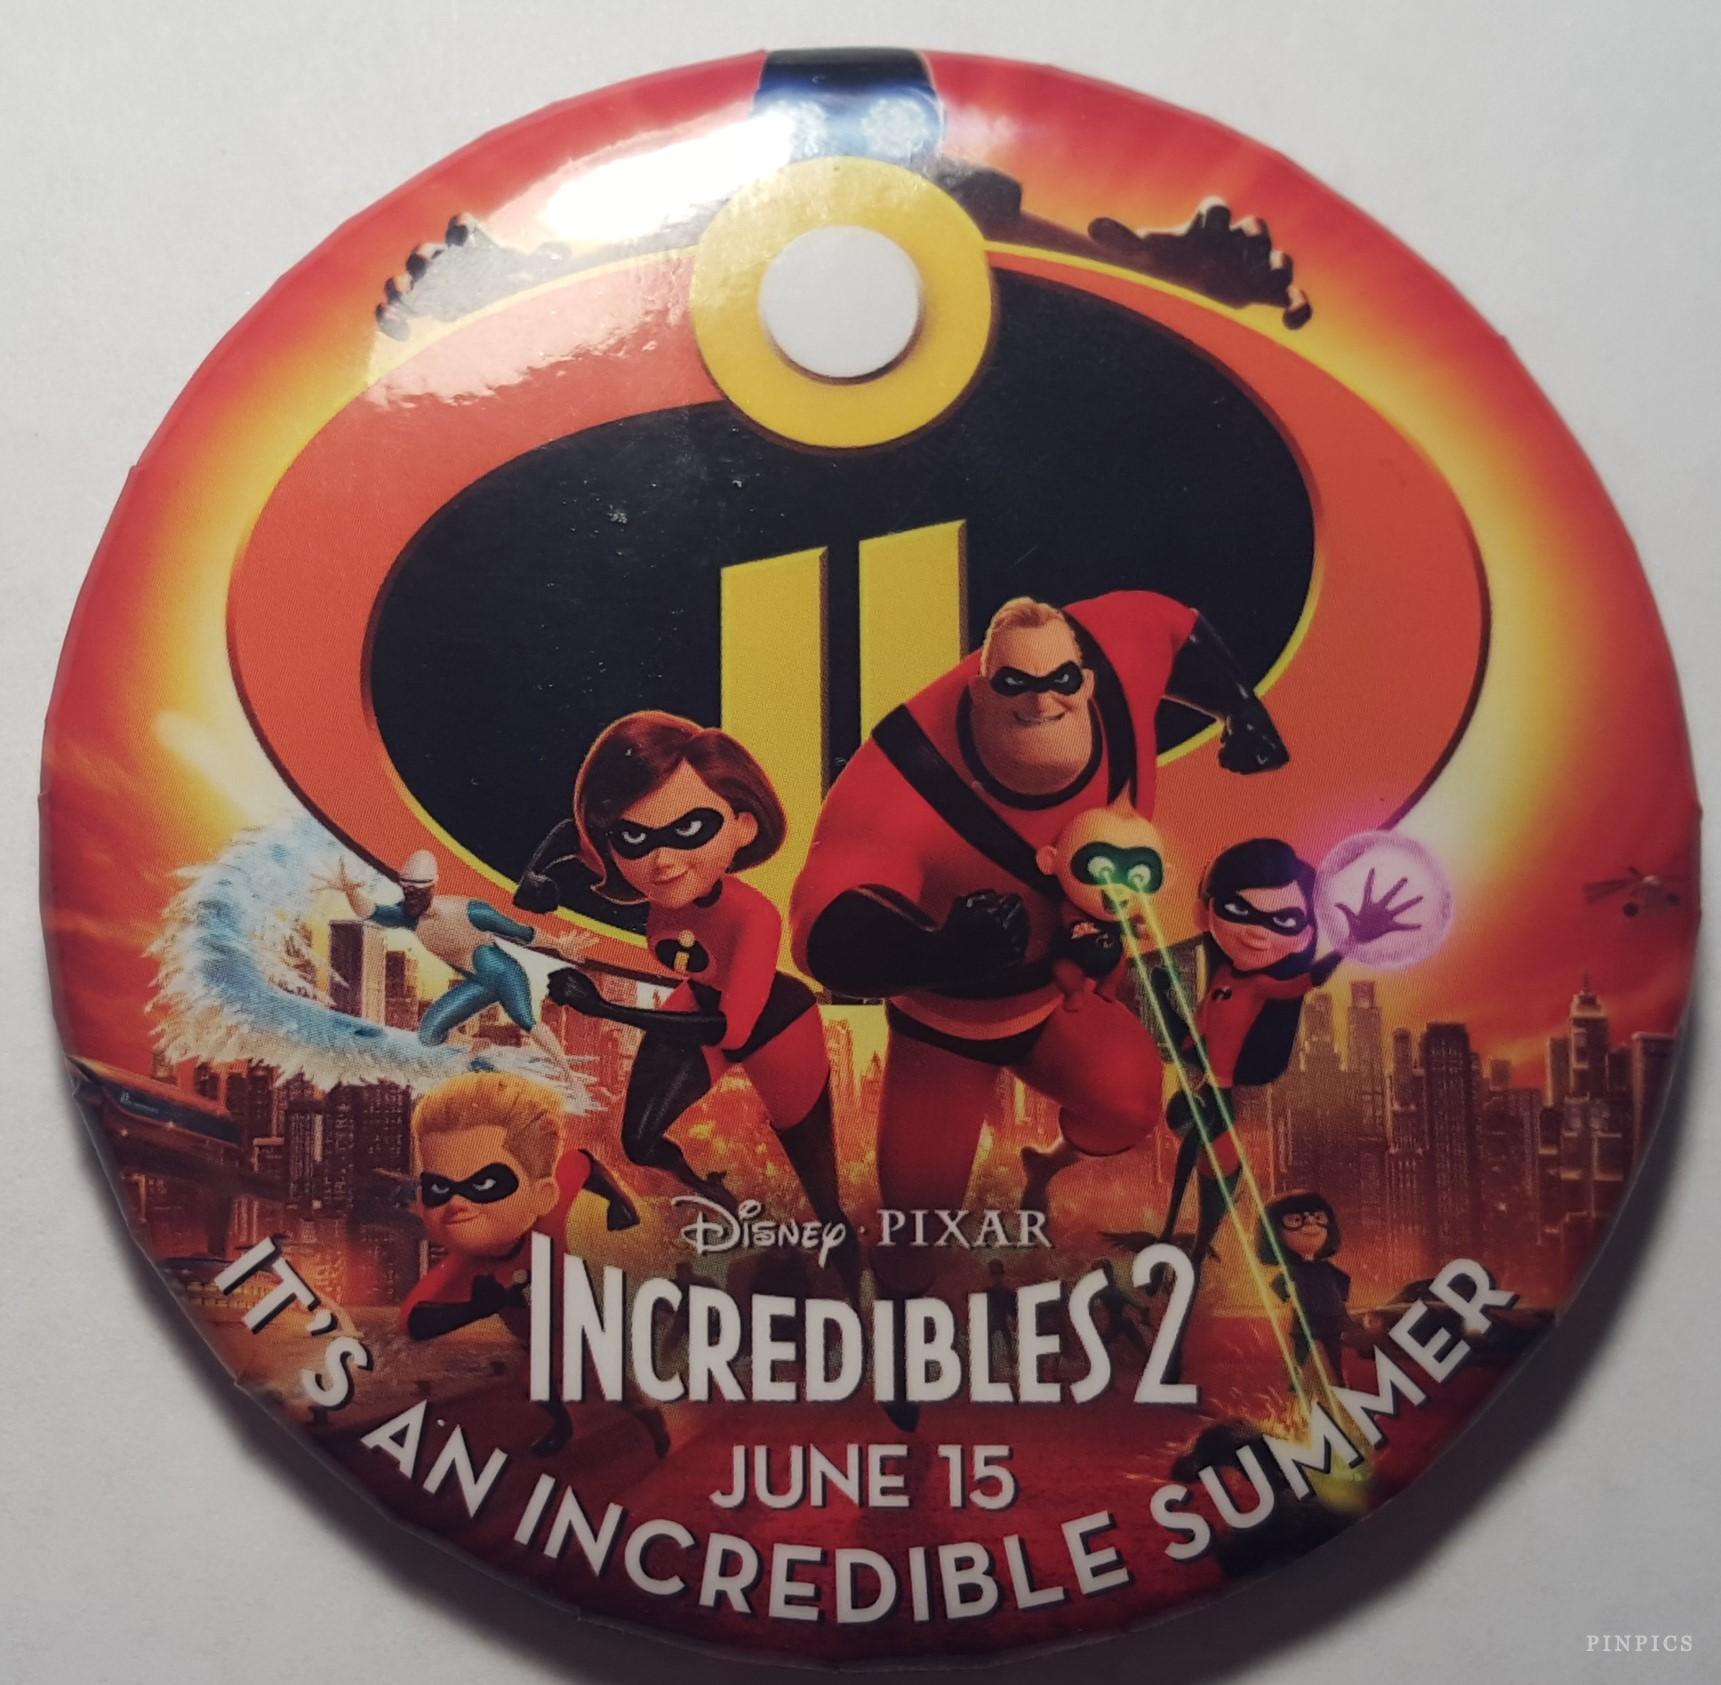 Incredibles 2 - Opening Day Promo Button